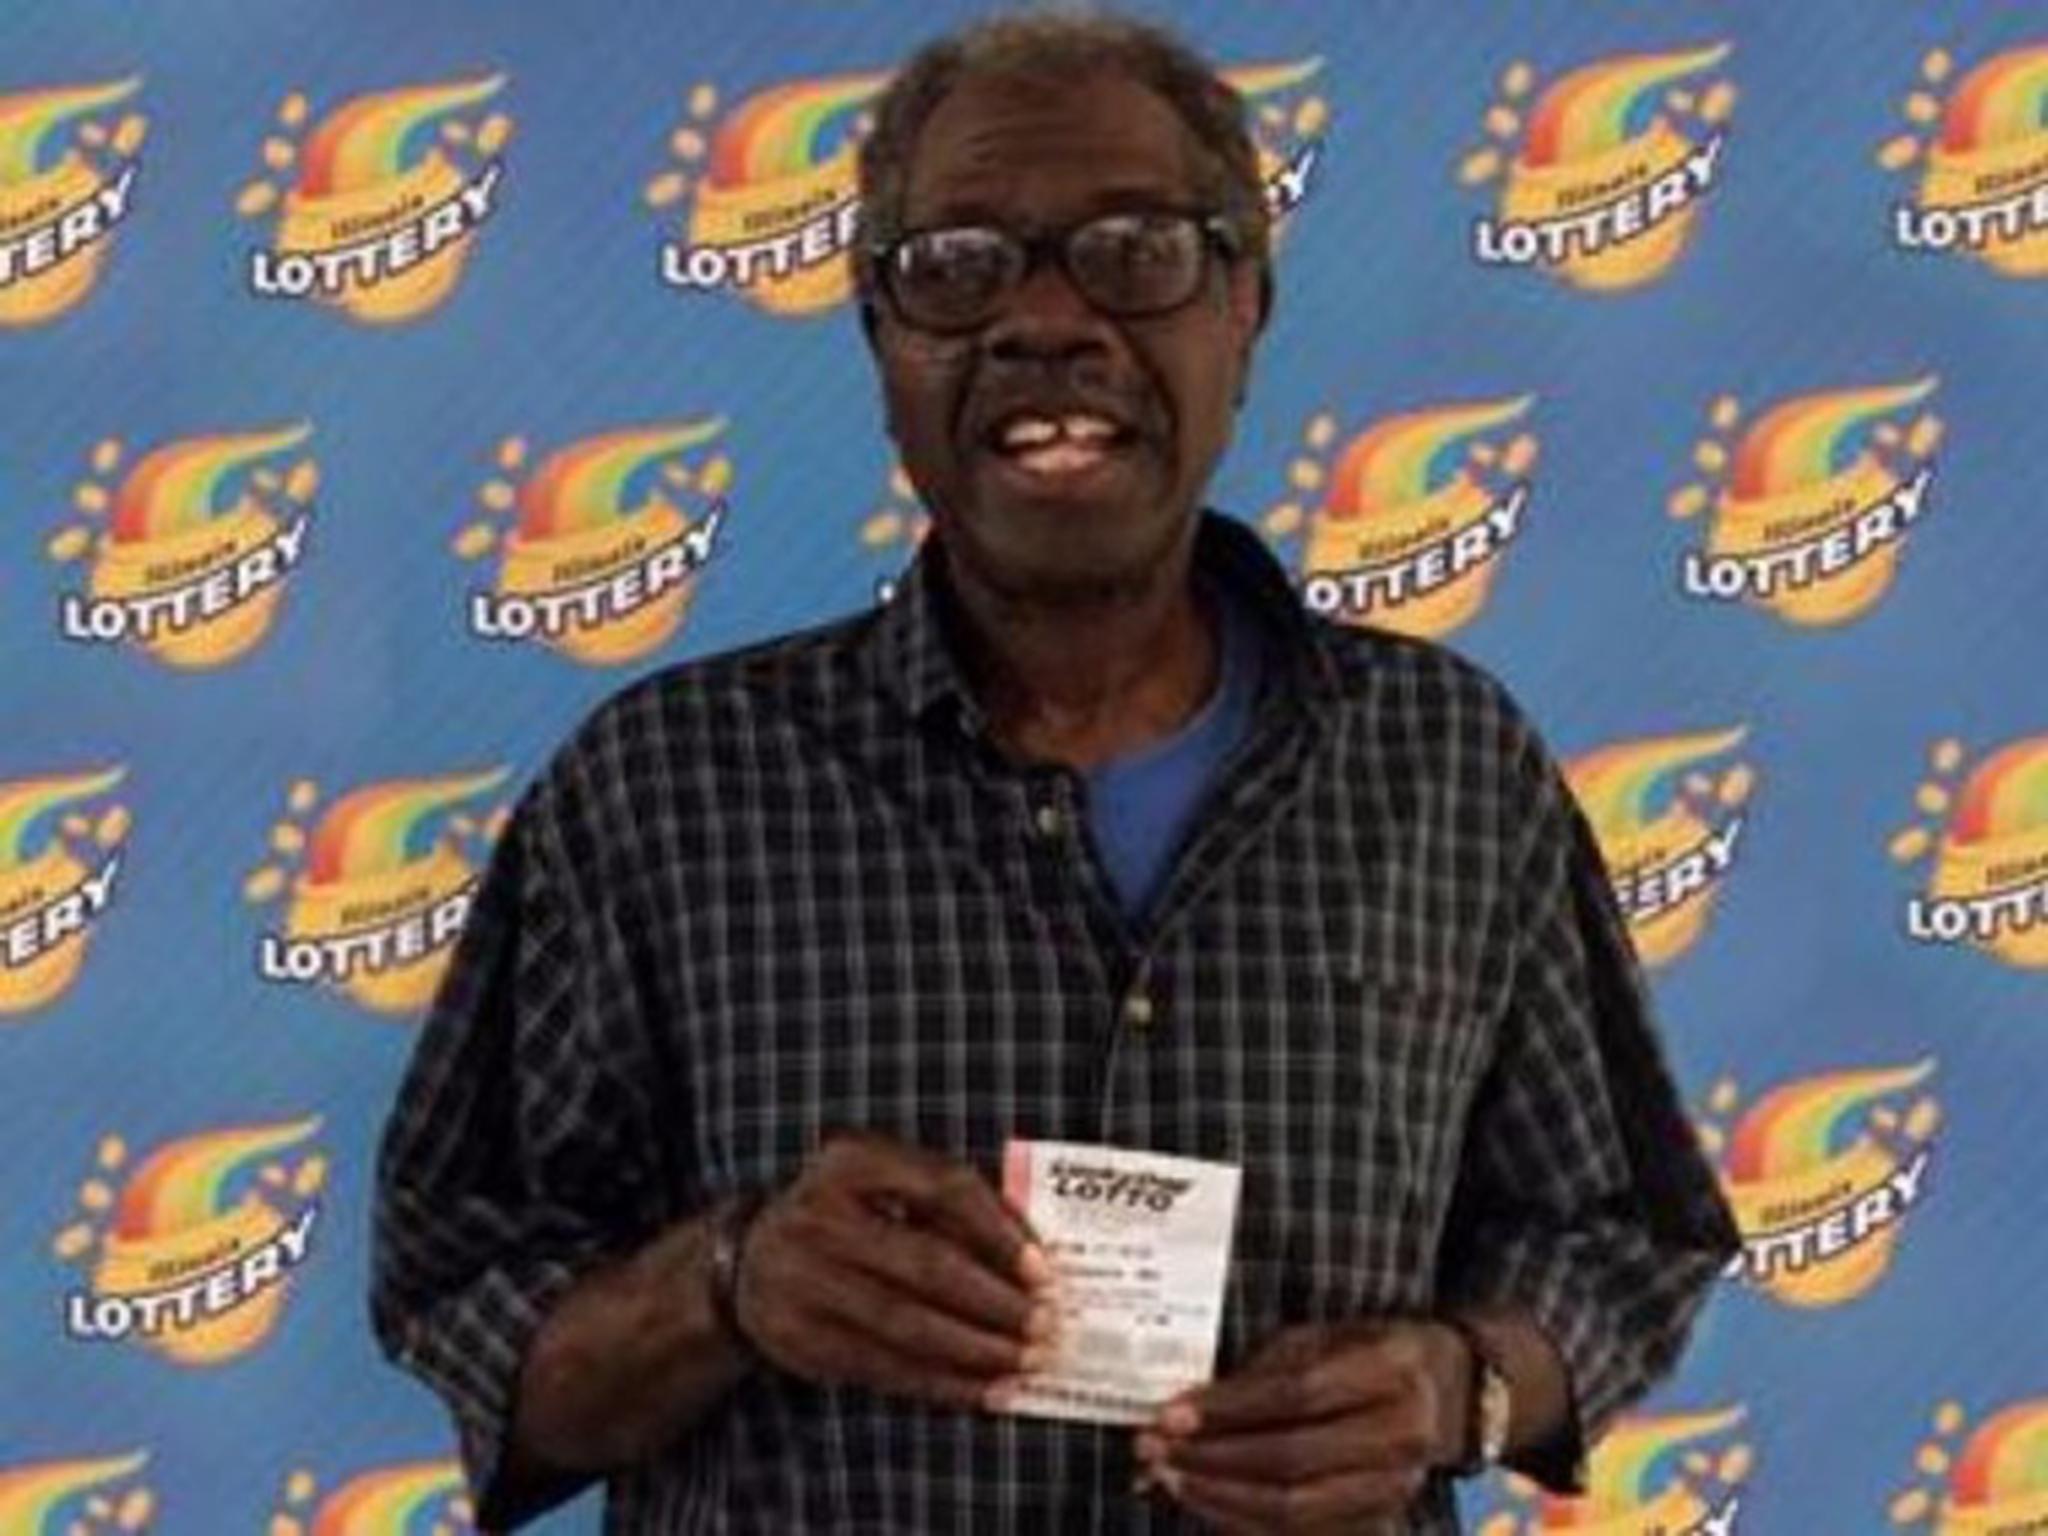 Larry Gambles with his winning ticket